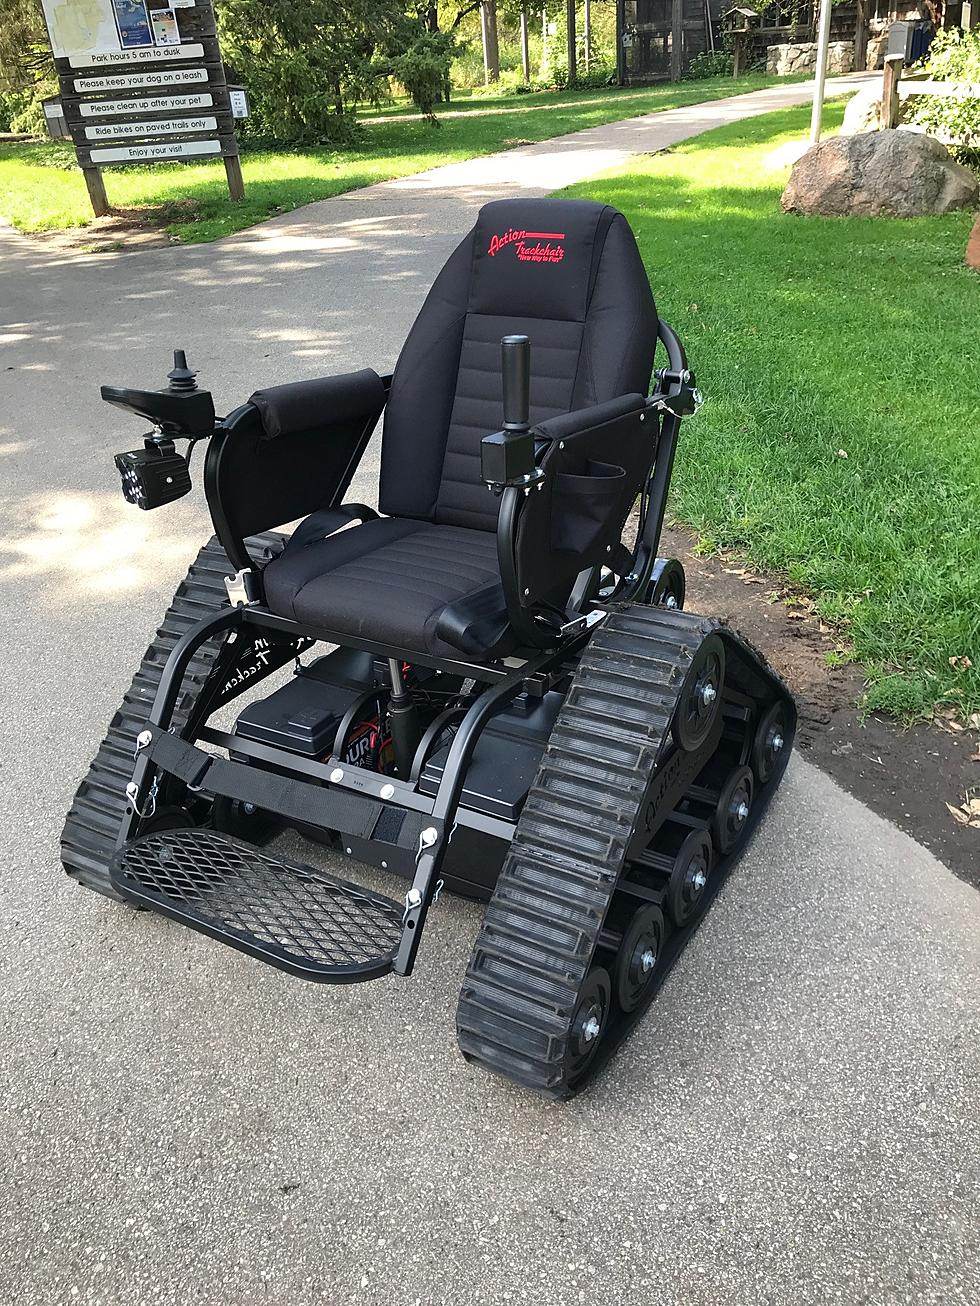 Amazing New Action Trackchair Arrives to Use in Rochester Parks!